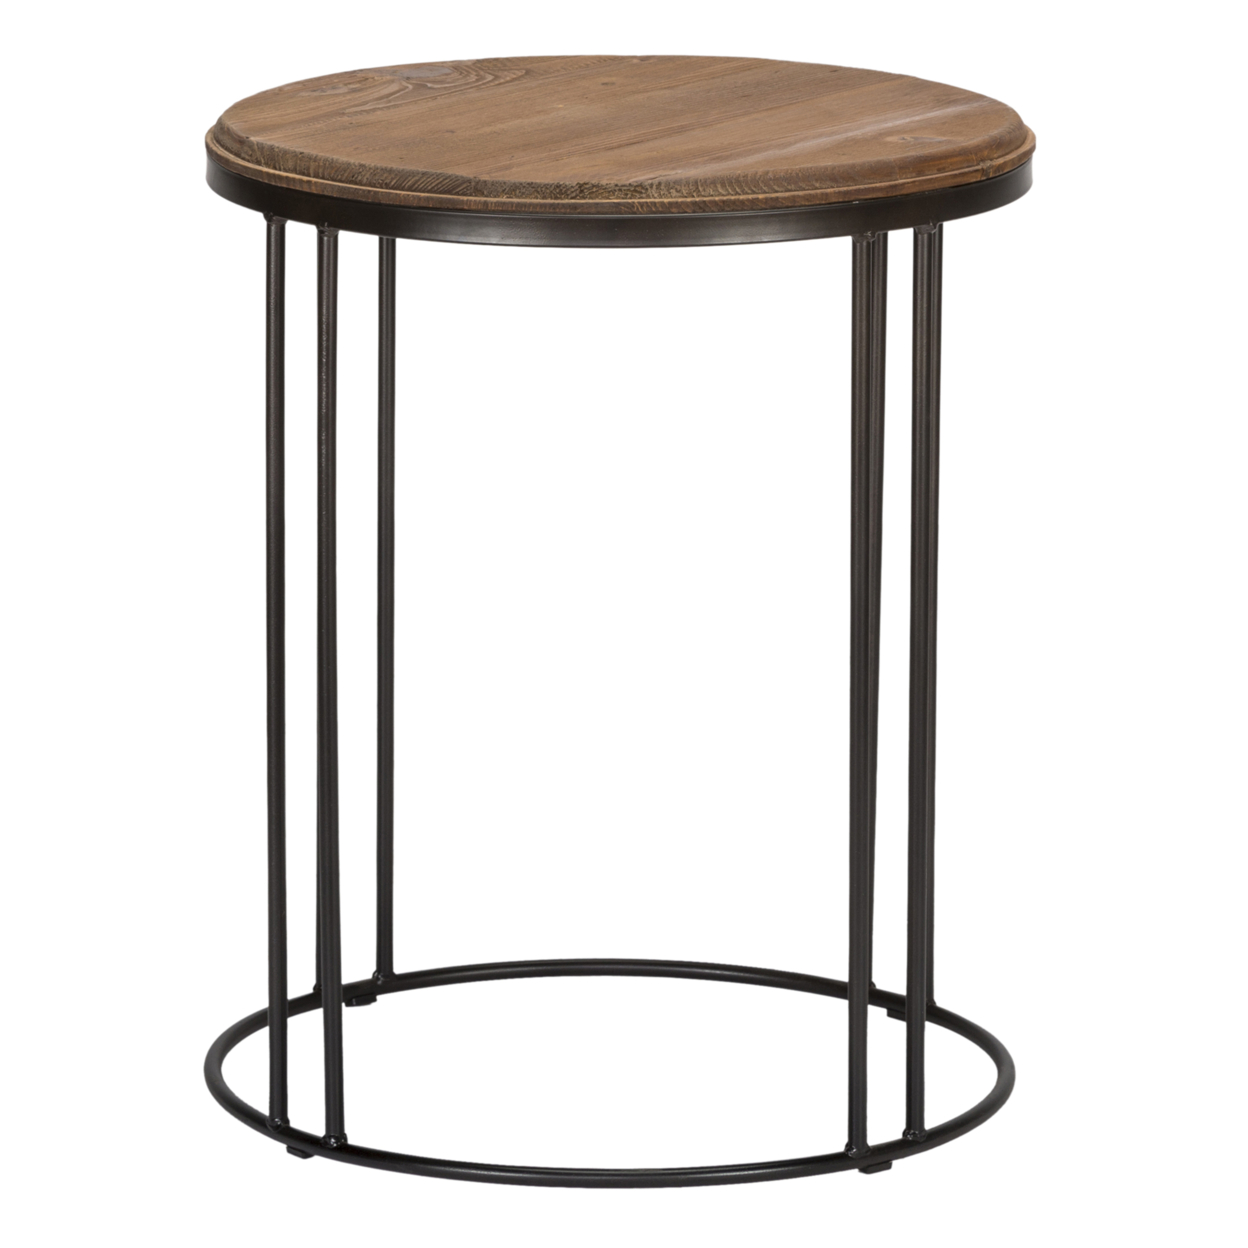 Industrial Style Circular Wooden End Table With Iron Open Base, Brown And Black- Saltoro Sherpi